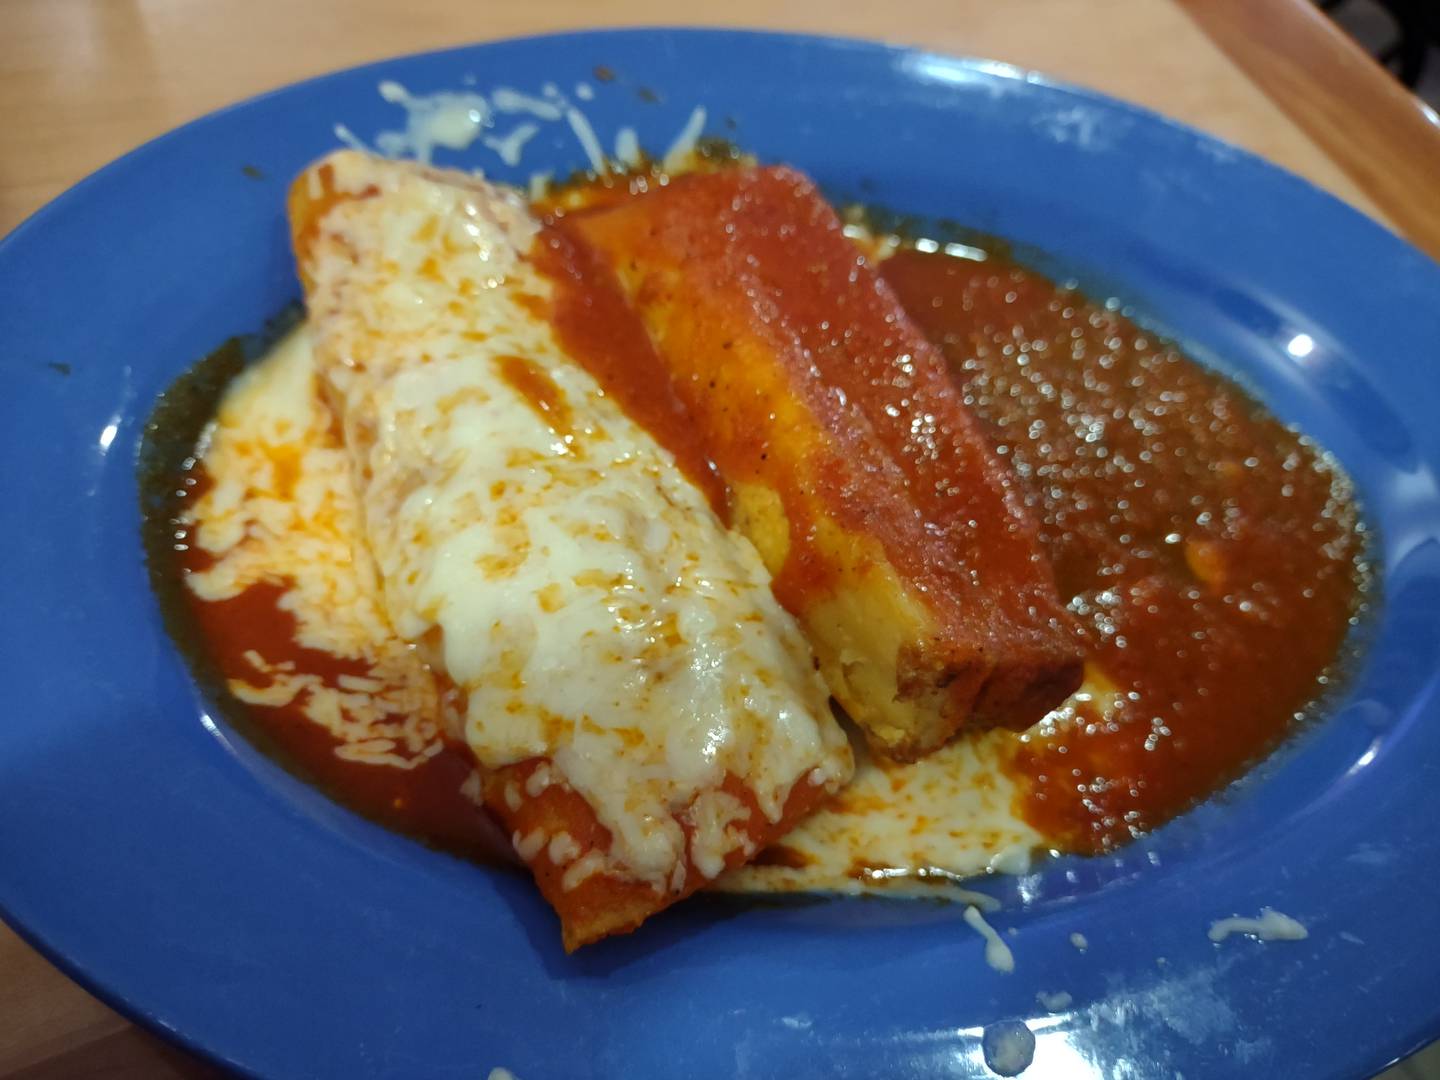 An enchilada and a pork tamale from La Casa Jalisco in Streator.